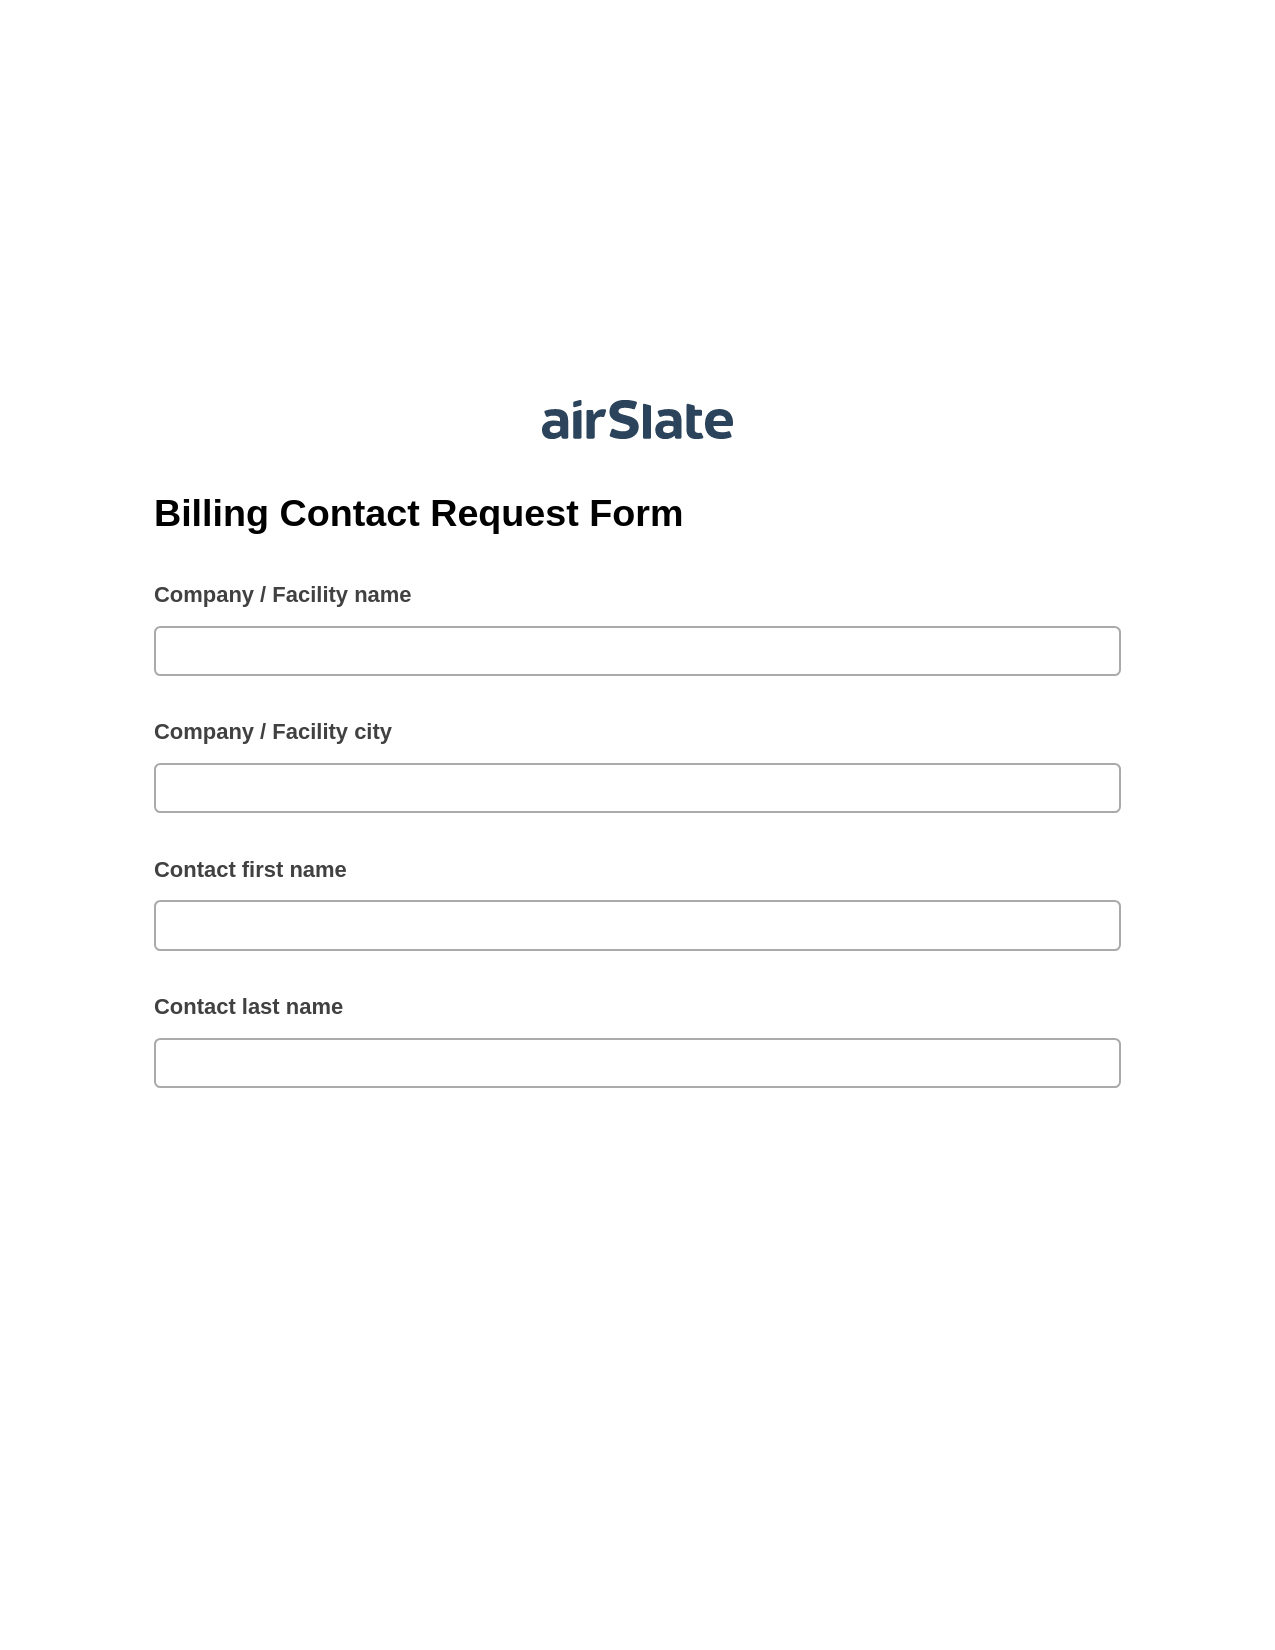 Billing Contact Request Form System Bot - Slack Two-Way Binding Bot, Unassign Role Bot, Export to Salesforce Bot